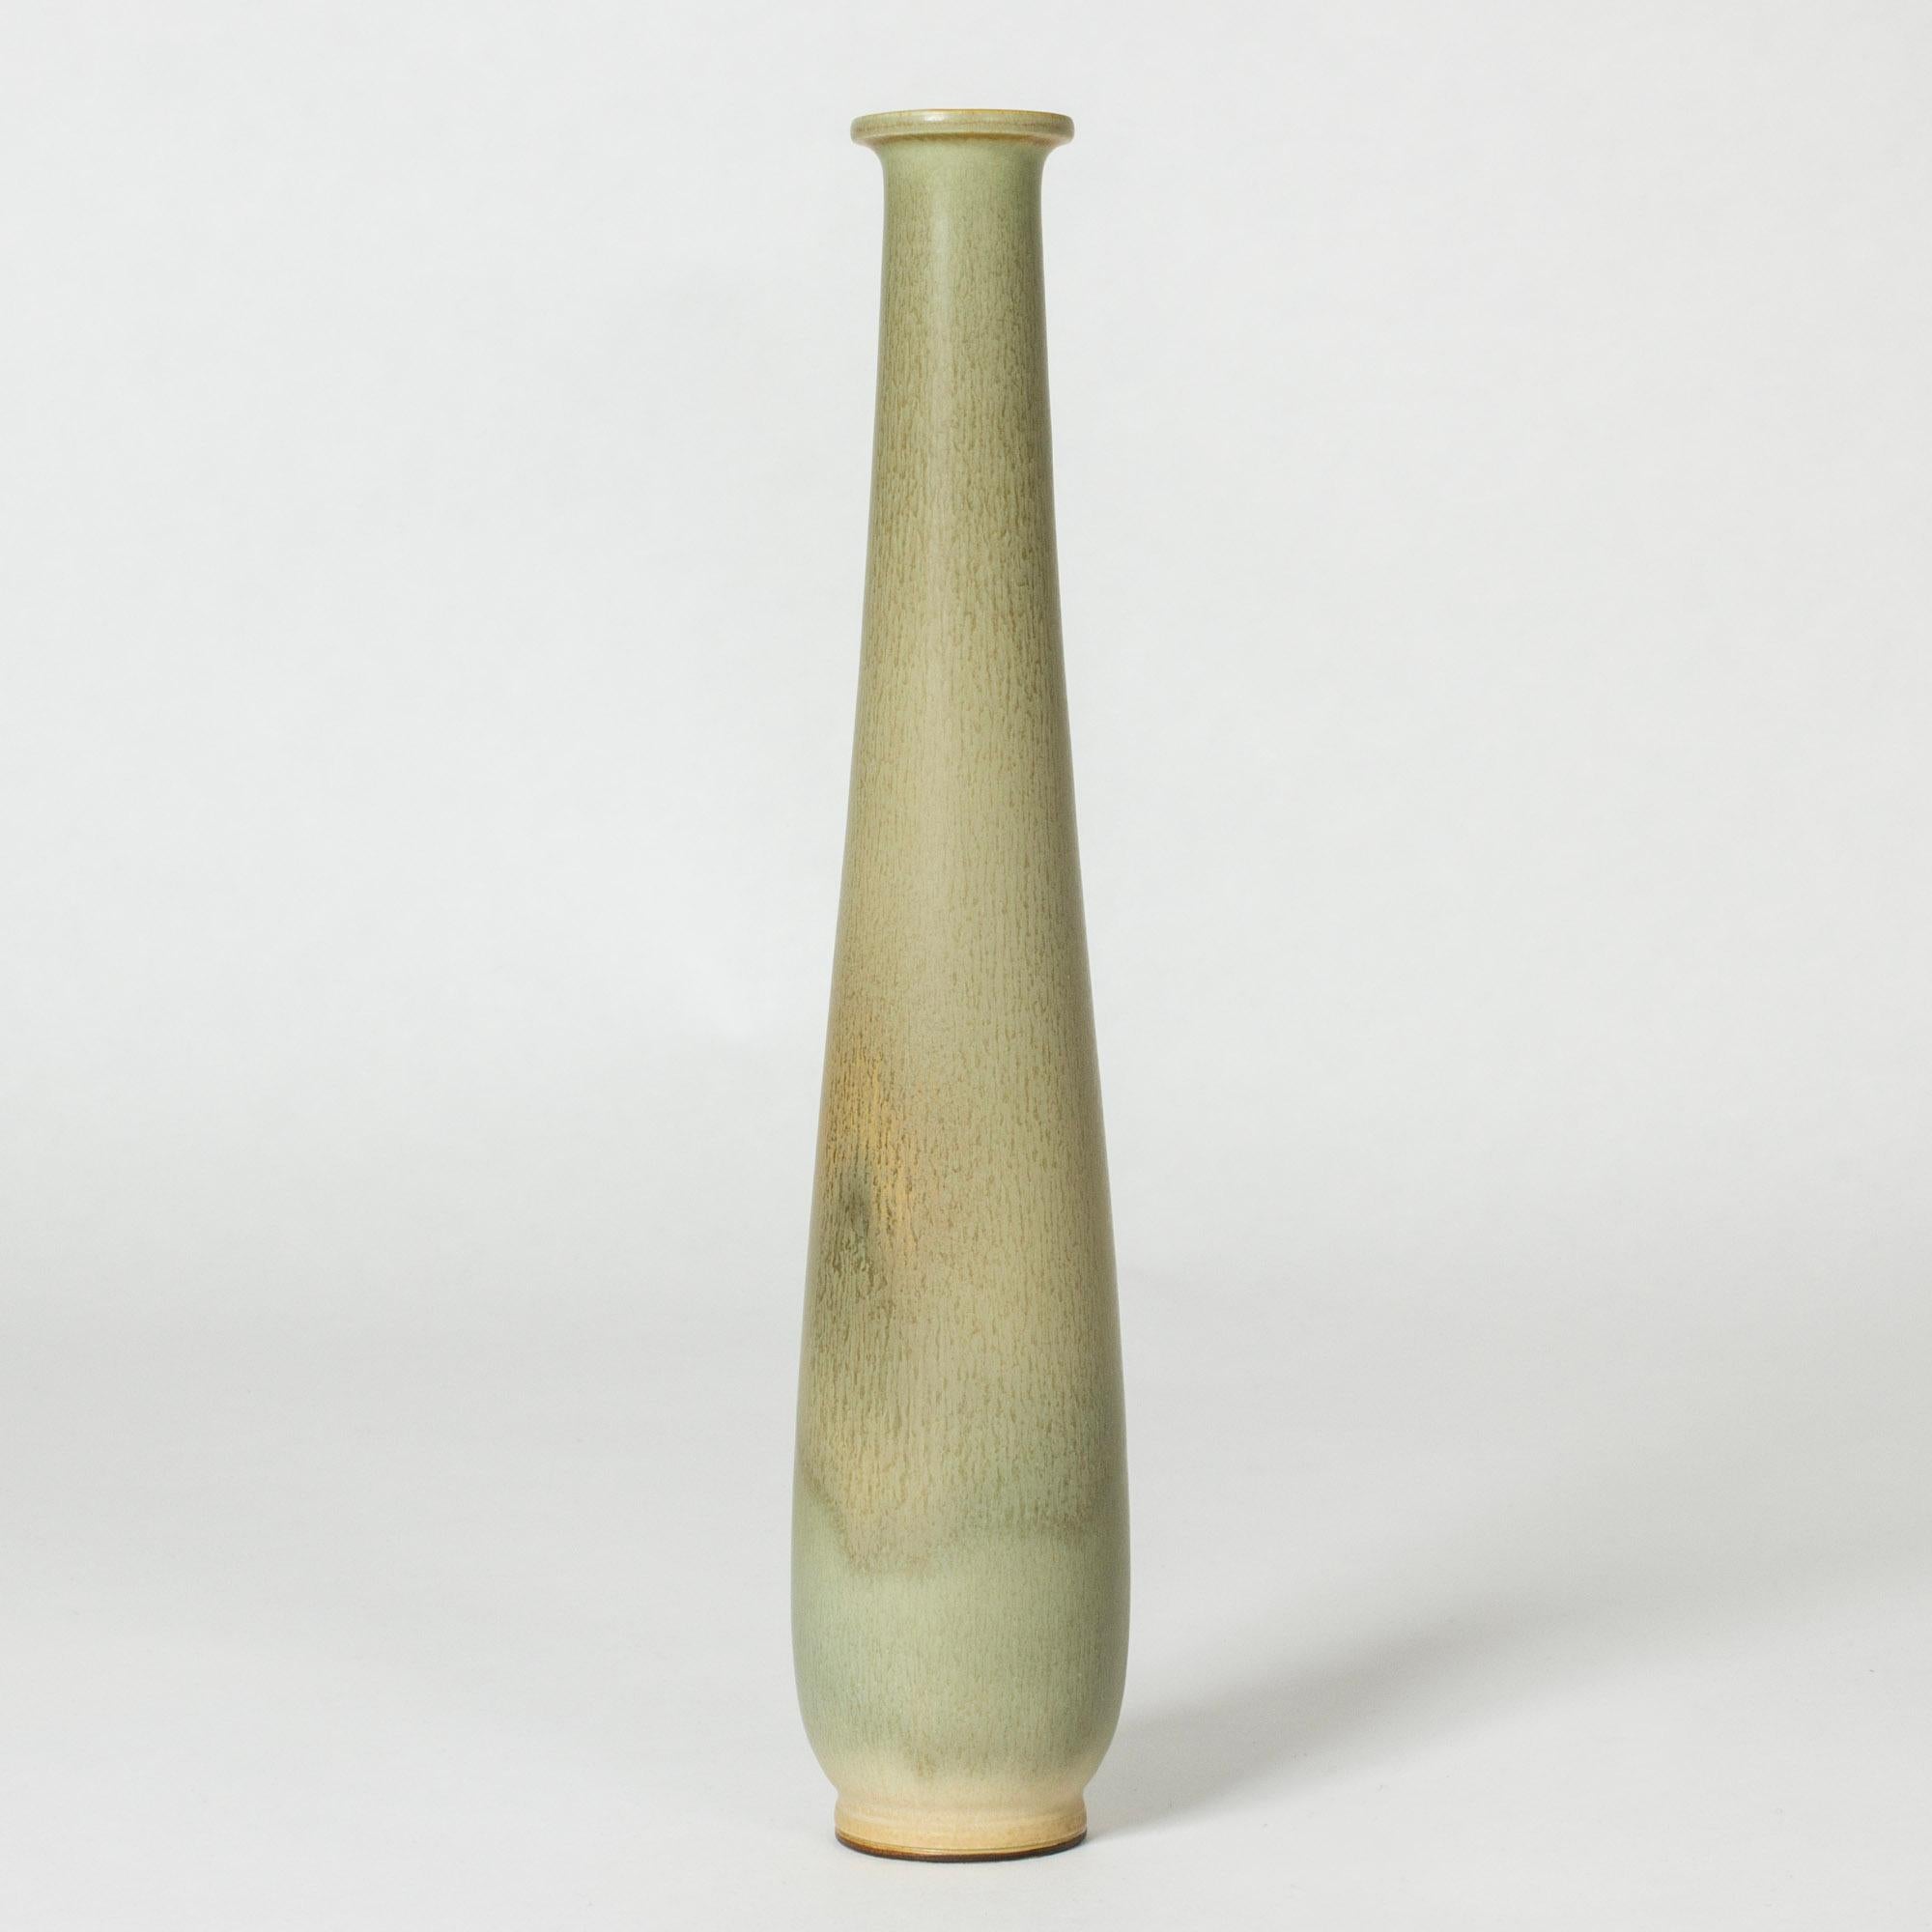 Stoneware vase by Berndt Friberg in a long elegantly streamlined form. Pale celadon green glaze with rusty flecks.

Berndt Friberg was a Swedish ceramicist, renowned for his stoneware vases and vessels for Gustavsberg. His pure, composed designs